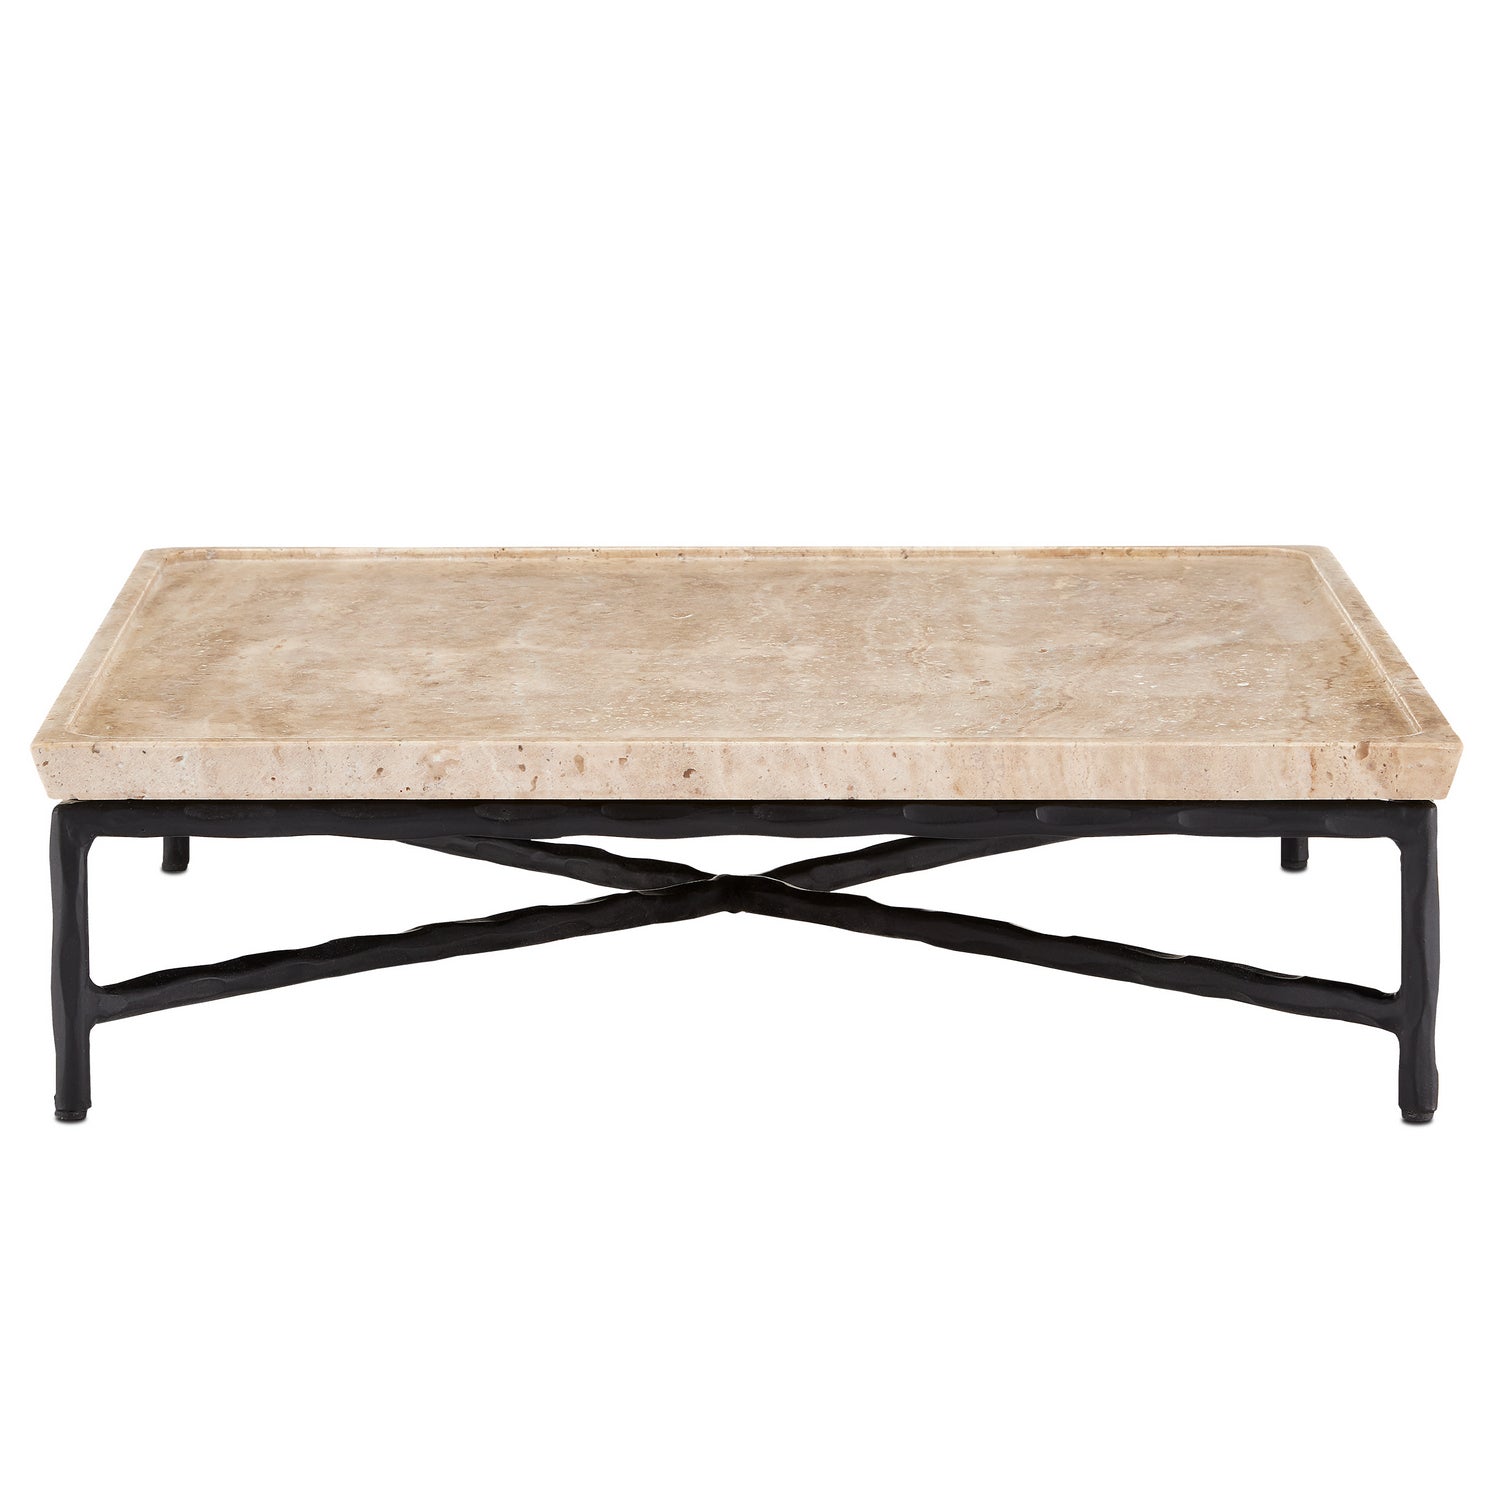 Tray from the Boyles collection in Natural/Black finish